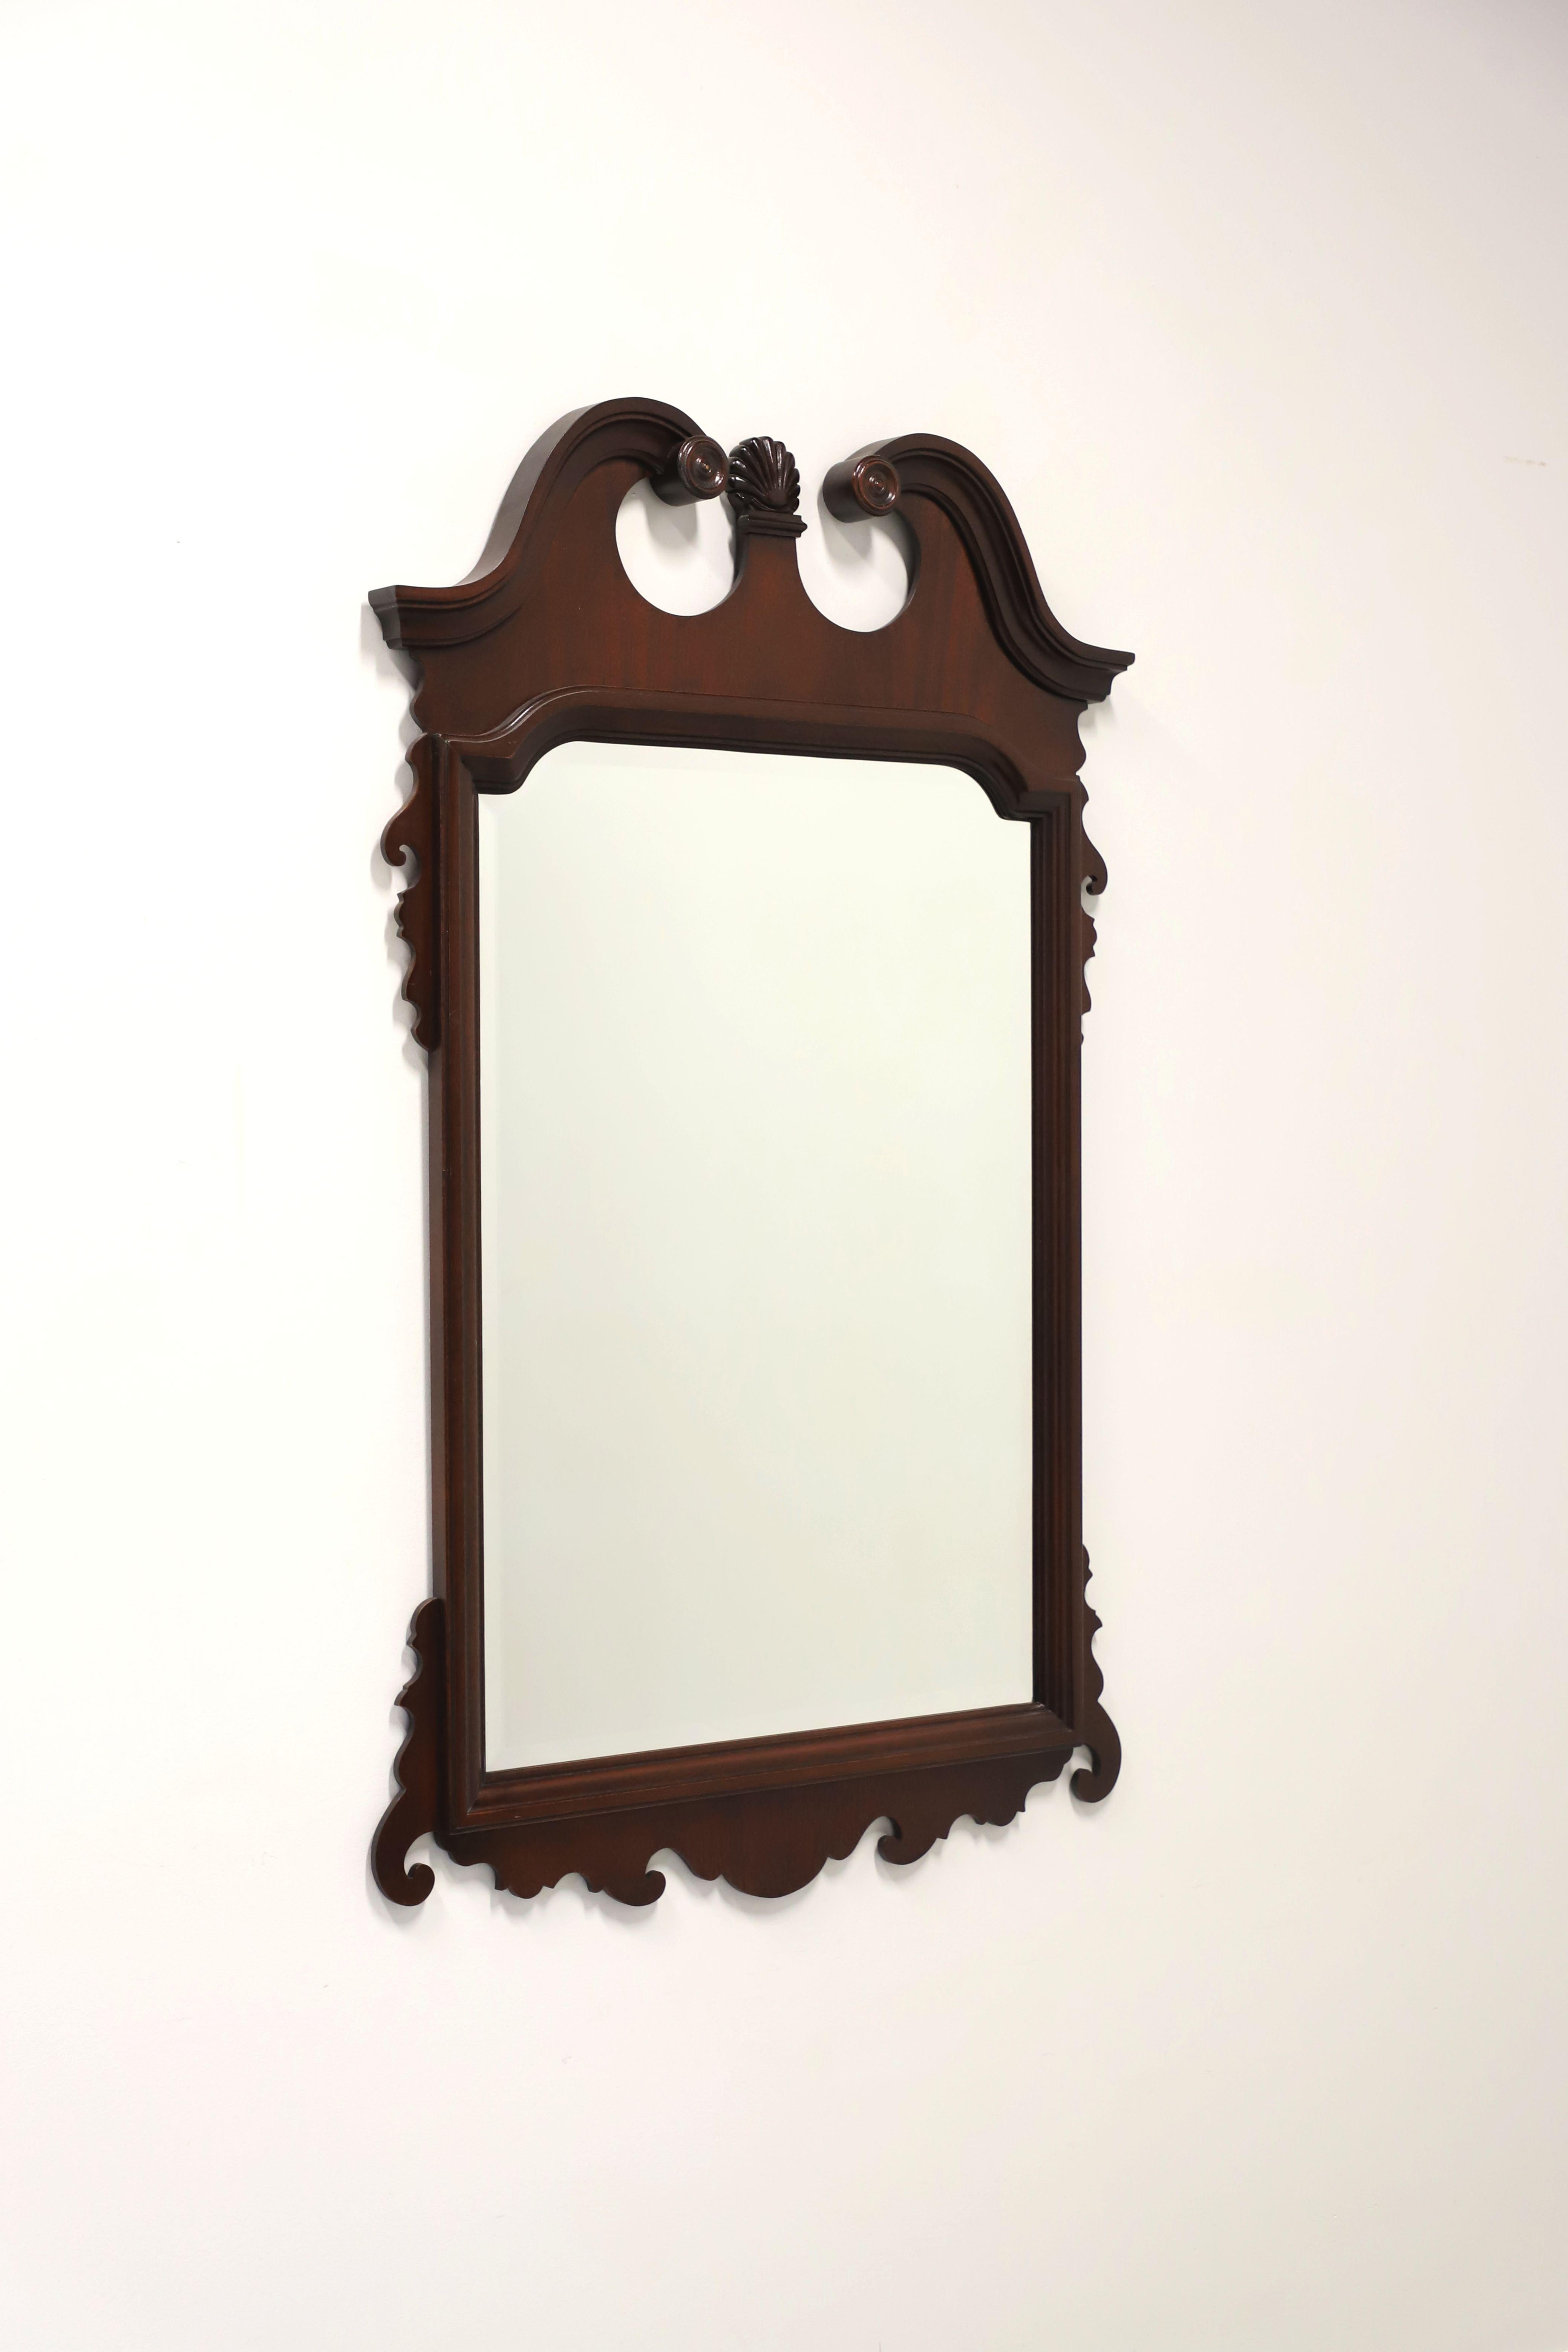 A Chippendale style wall mirror made by Link-Taylor, from their Heirloom Gallery. Beveled mirror glass in a solid mahogany frame, decoratively carved, and a broken arch top with center medallion. Made in Lexington, North Carolina, USA, circa